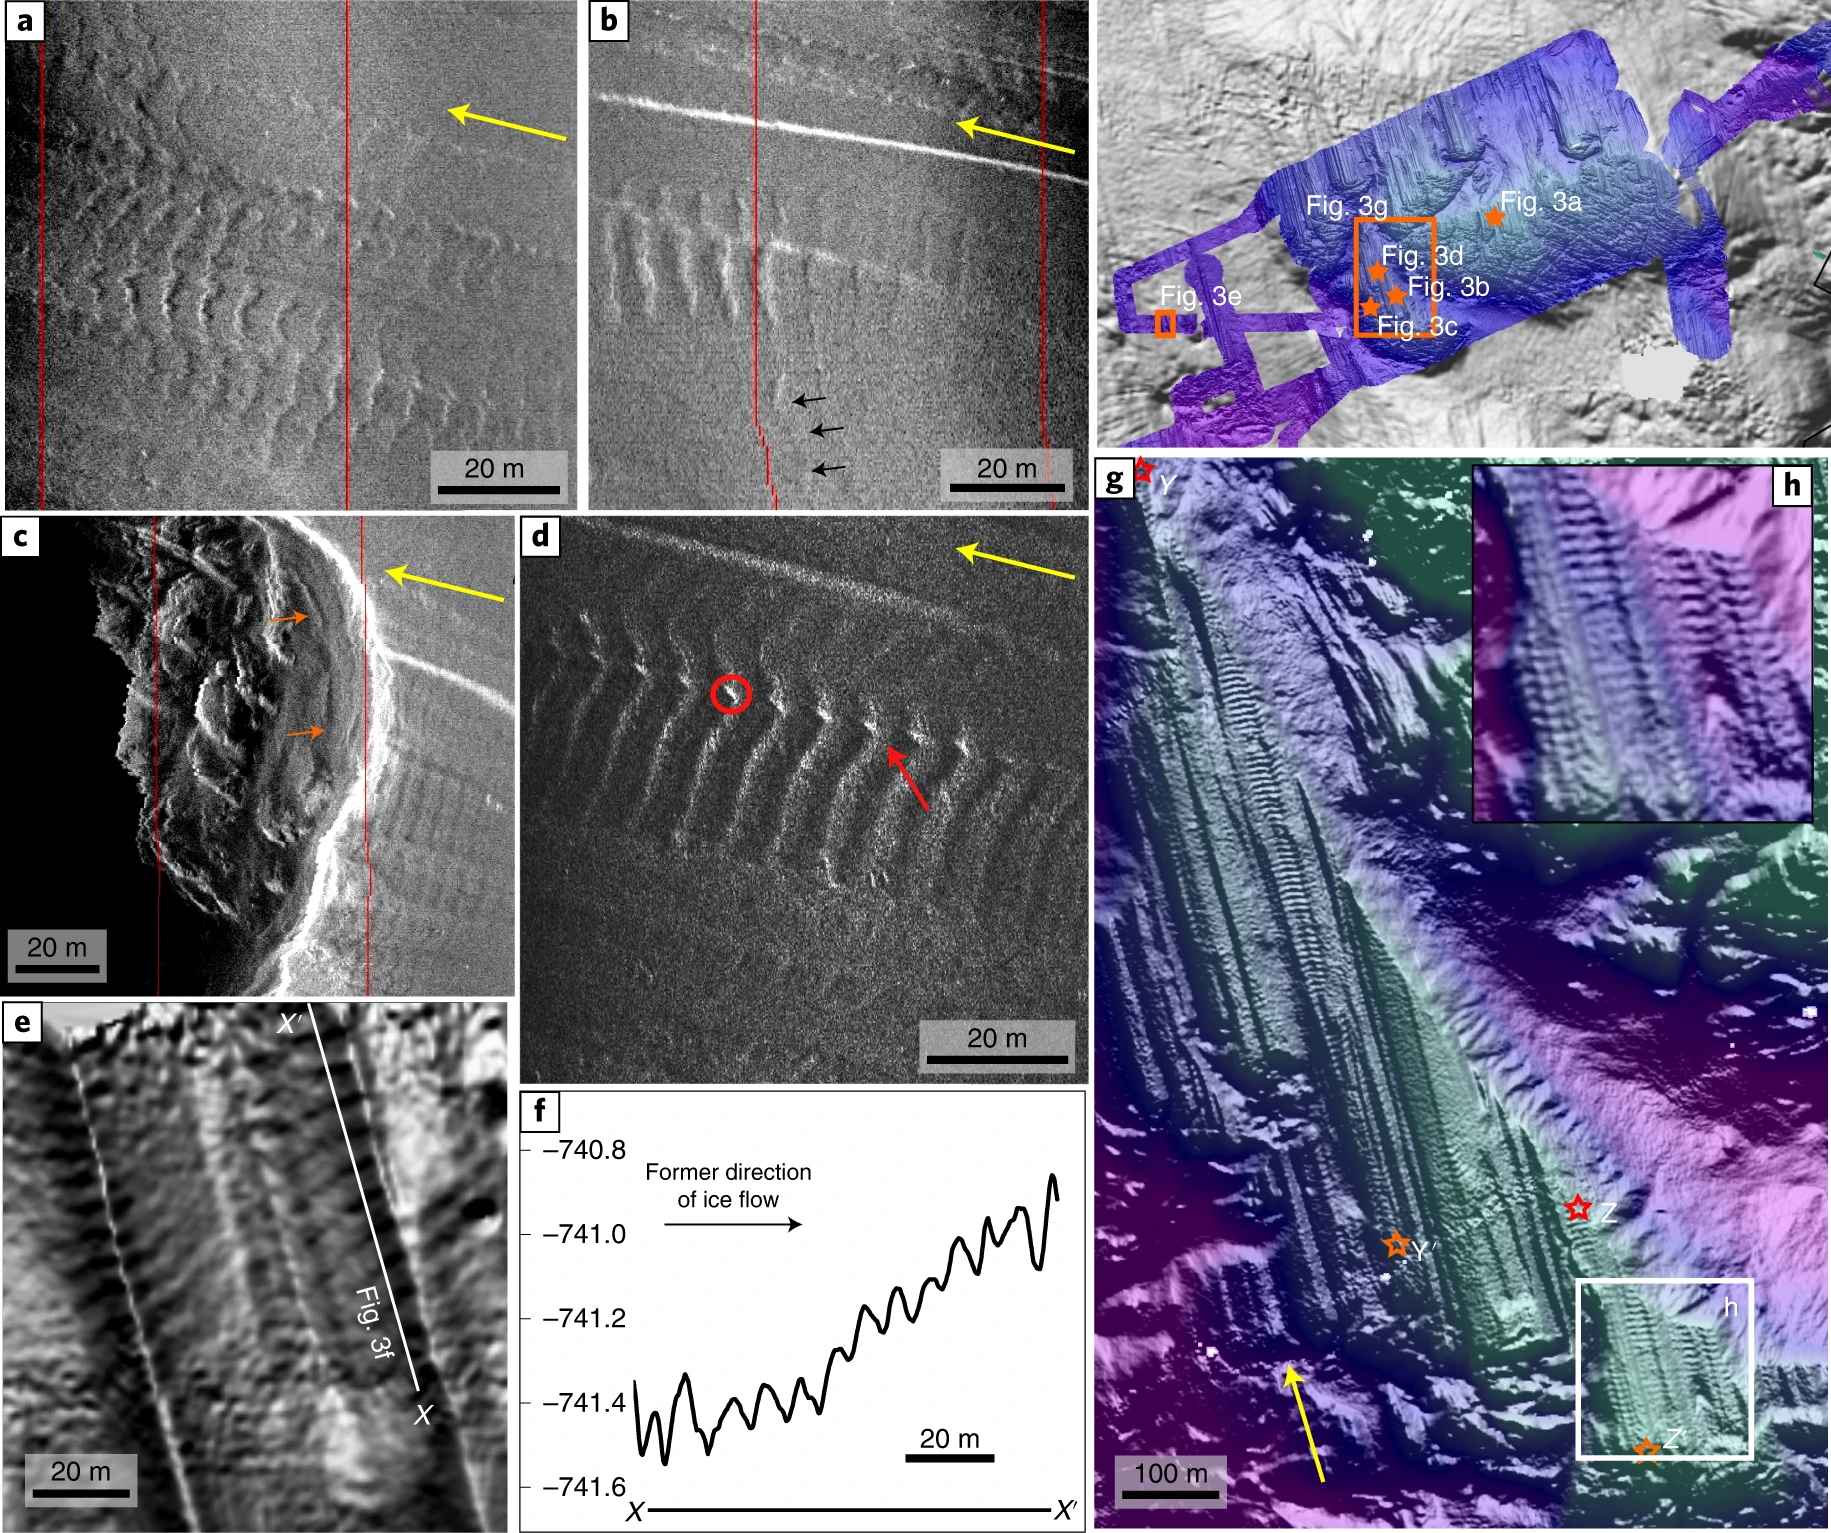 The image is a collage of pictures showing renderings of the sea floor, with regular 